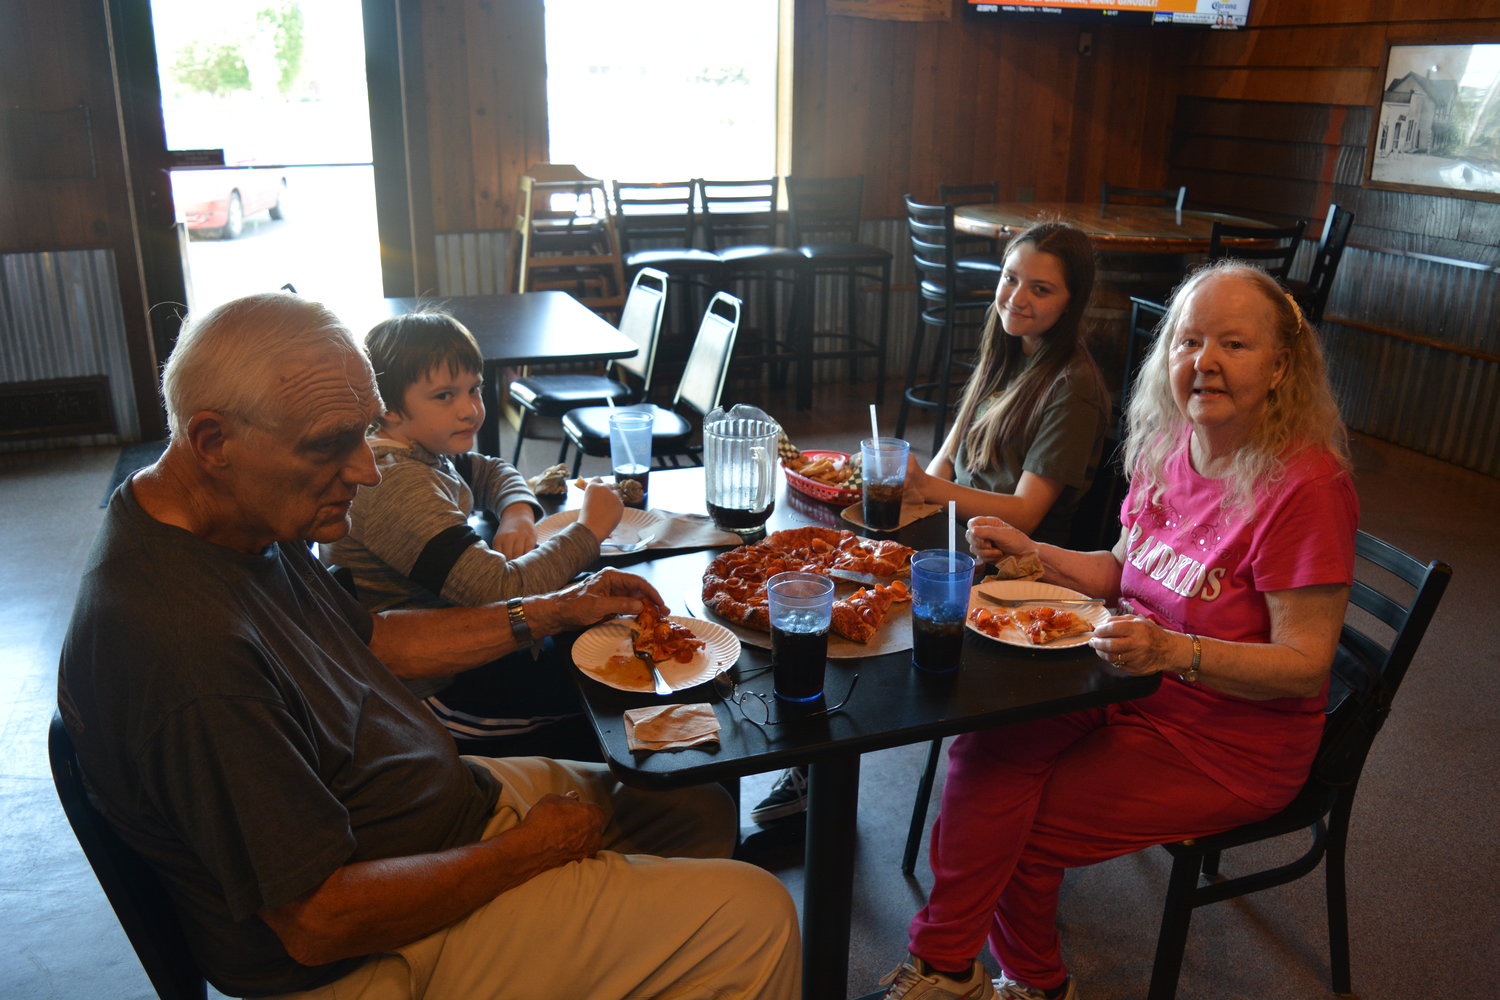 A family enjoys a pizza at Rocky’s Pizza & R Bar in Battle Ground on July 28.